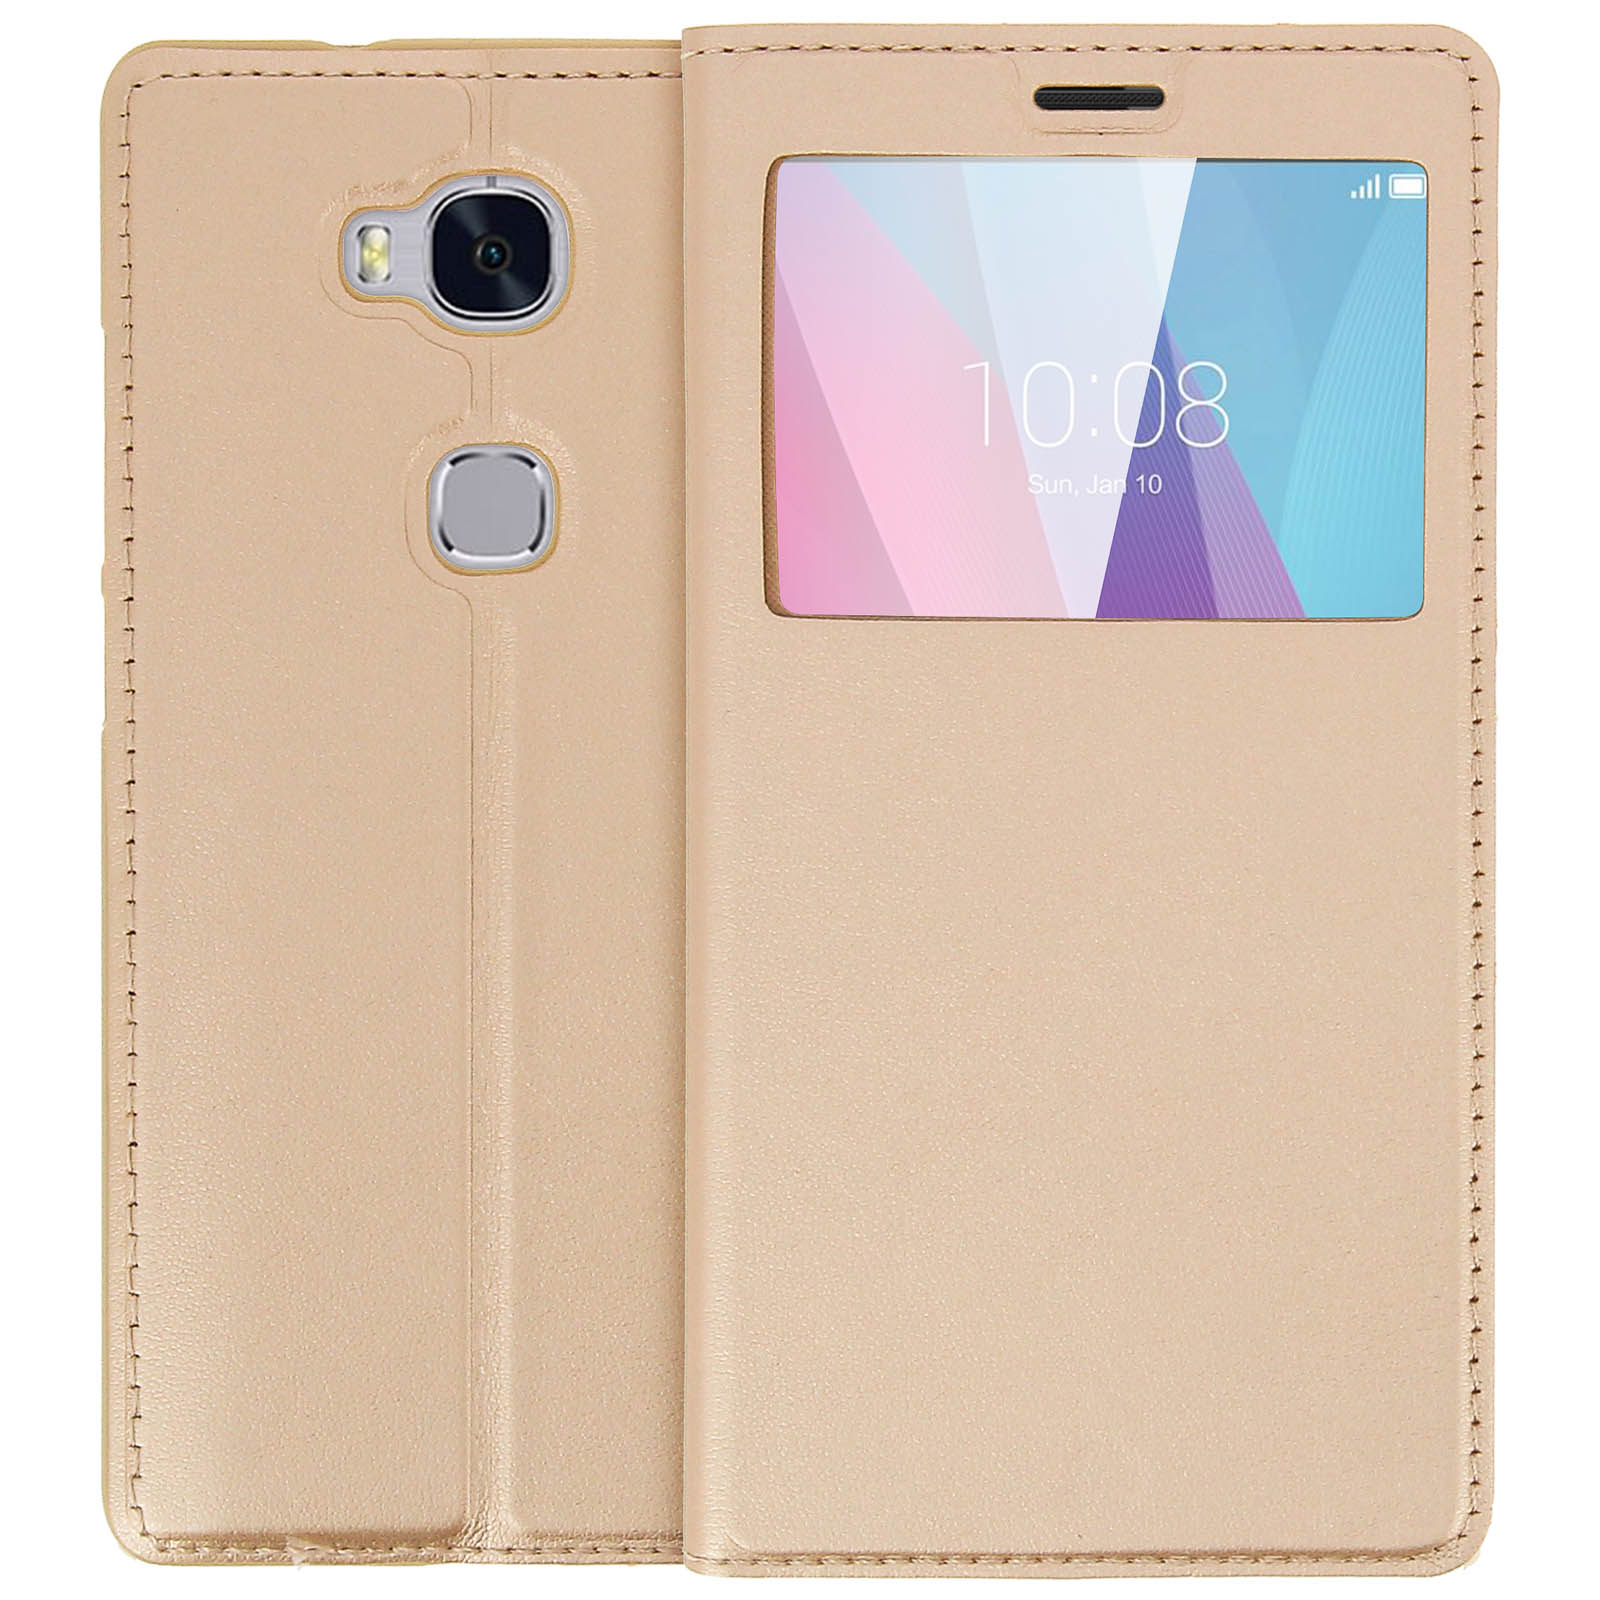 CLAPPIO Series, Bookcover, View Honor Honor, Cover Gold 5X,